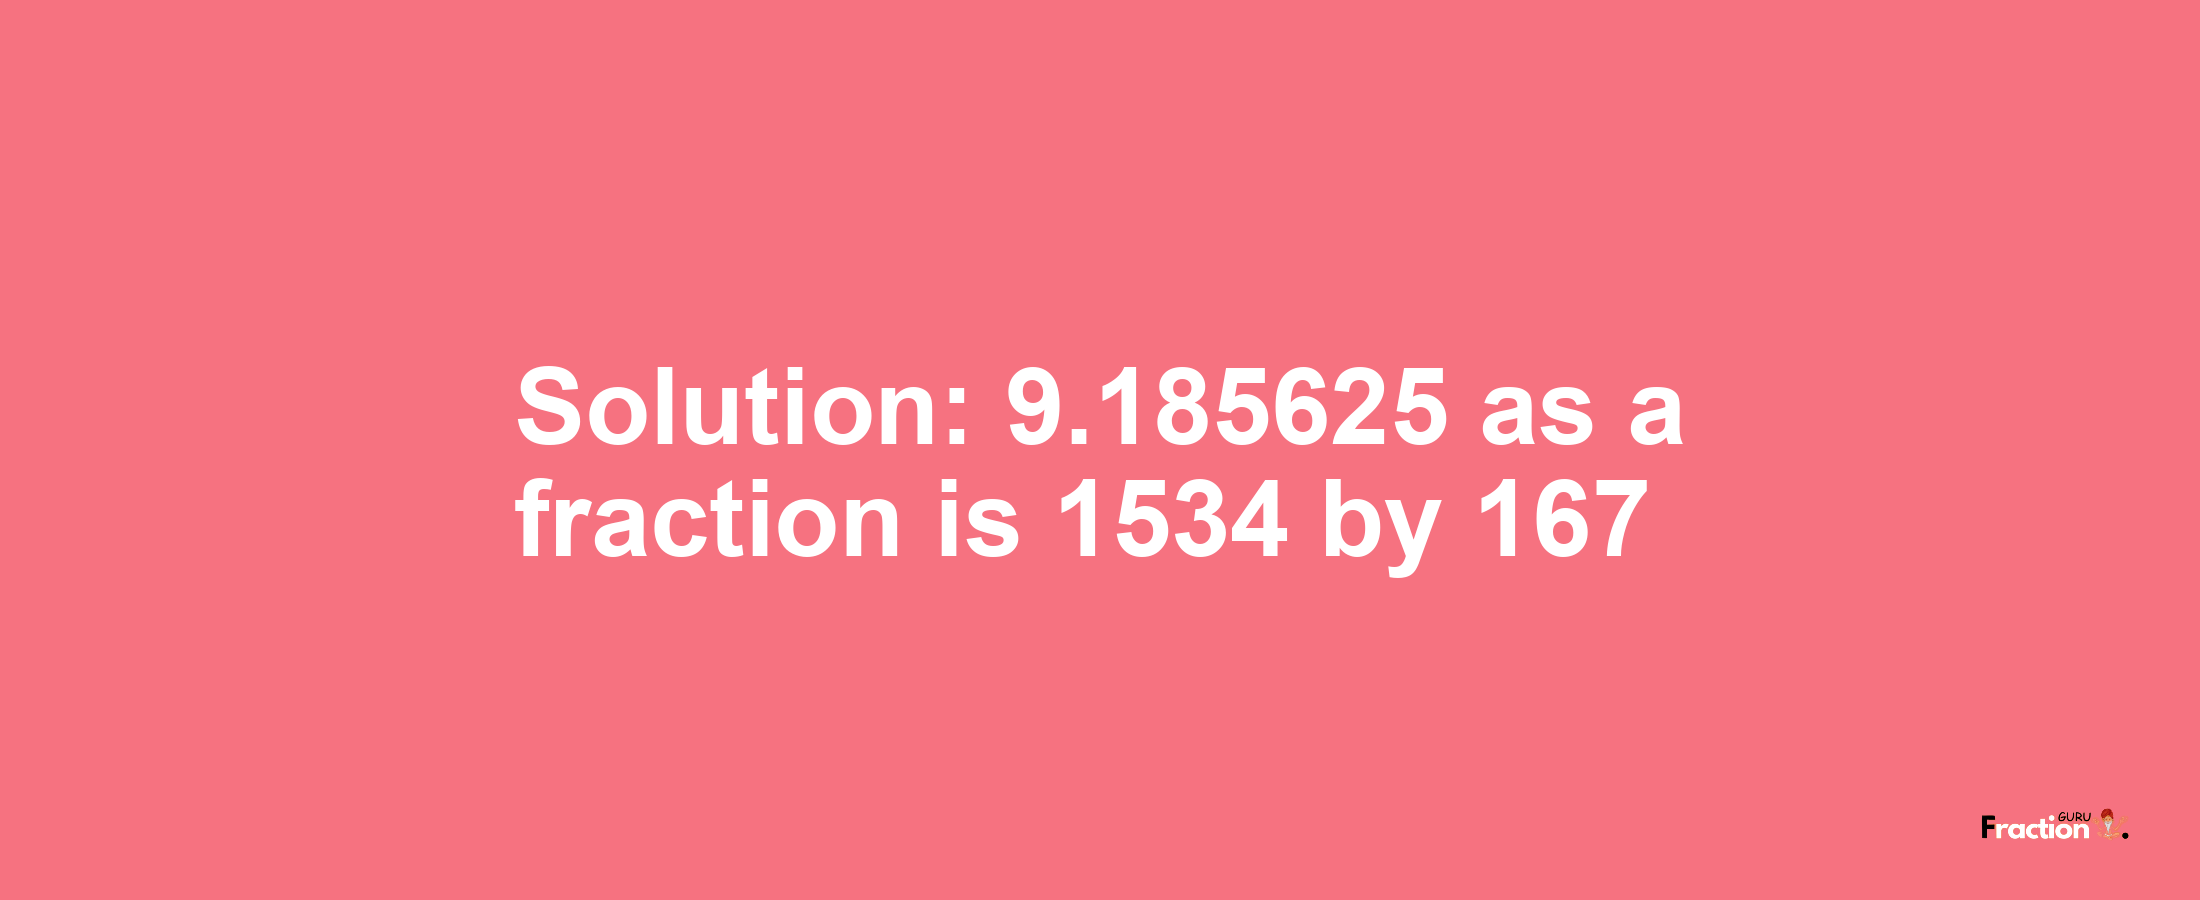 Solution:9.185625 as a fraction is 1534/167